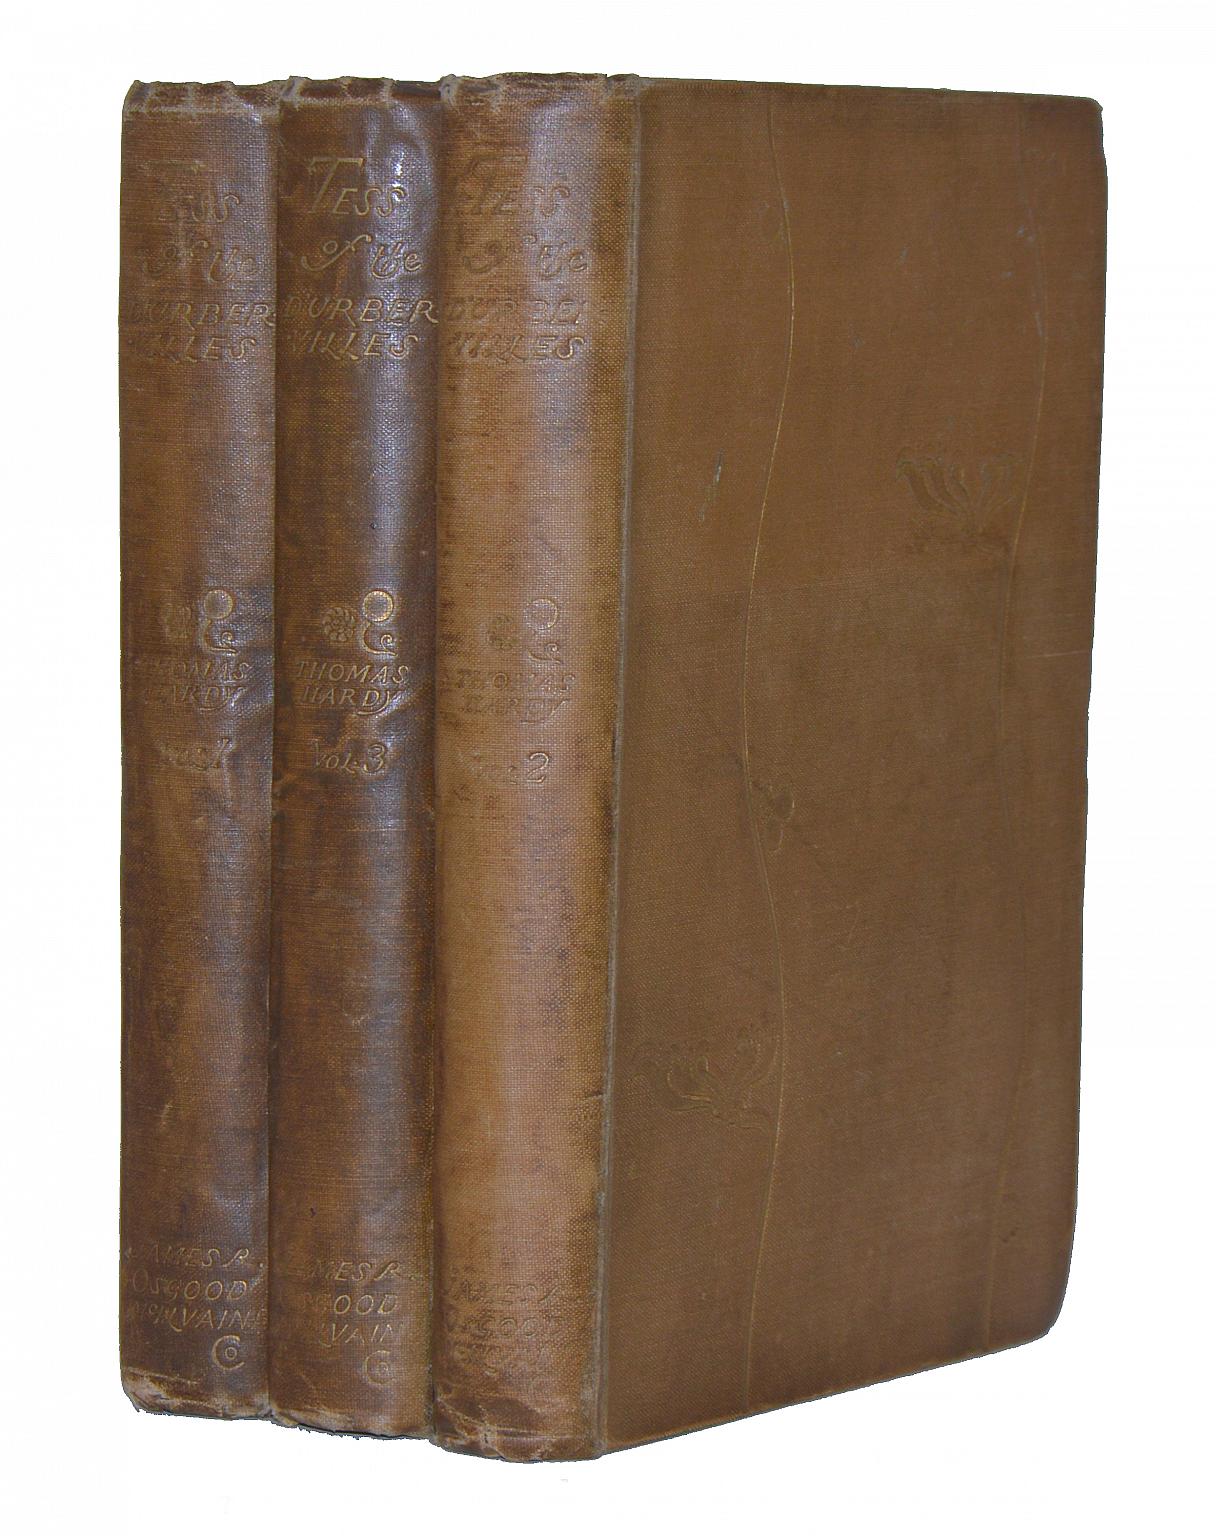 Hardy, Thomas. Tess of the D'Urbervilles, A Pure Woman, 3 volumes, first edition, first issue,